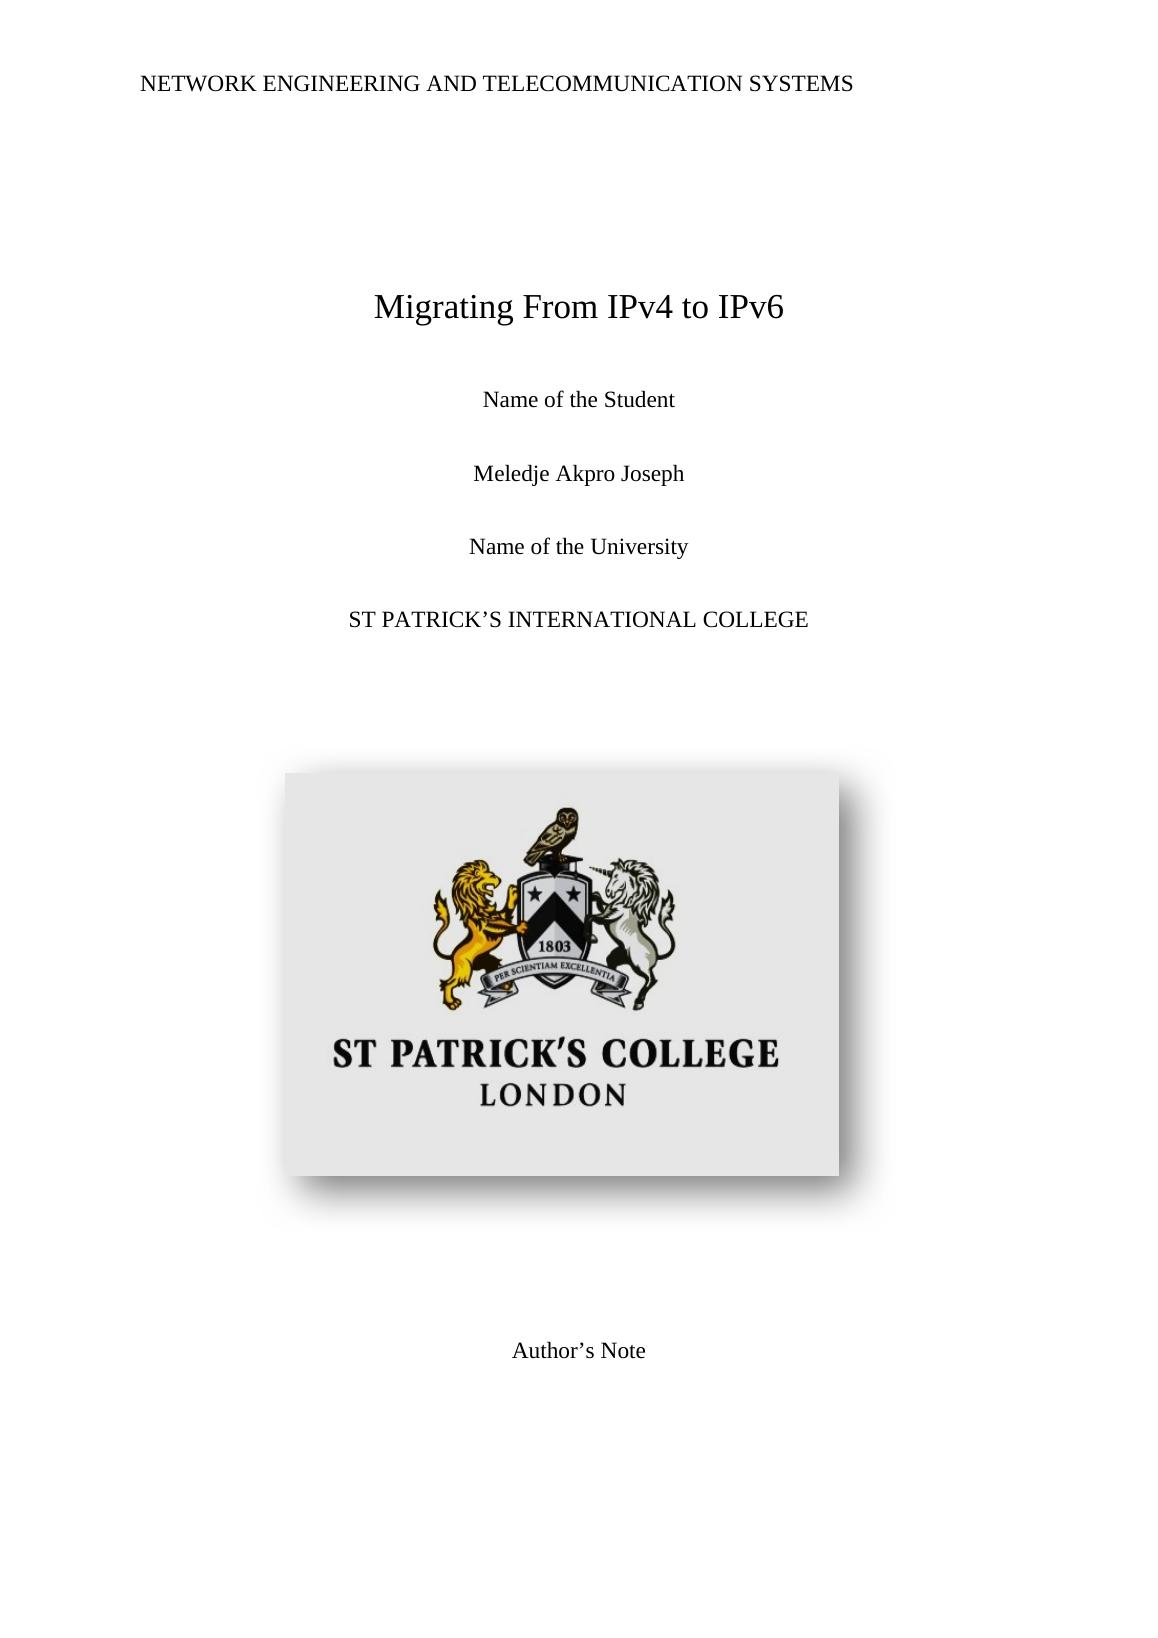 NETWORK ENGINEERING AND TELECOMMUNICATION SYSTEMS Migrating From IPv4 to IPv6 Name of the University ST Patrick's International College Author's Note Acknowledgement_1